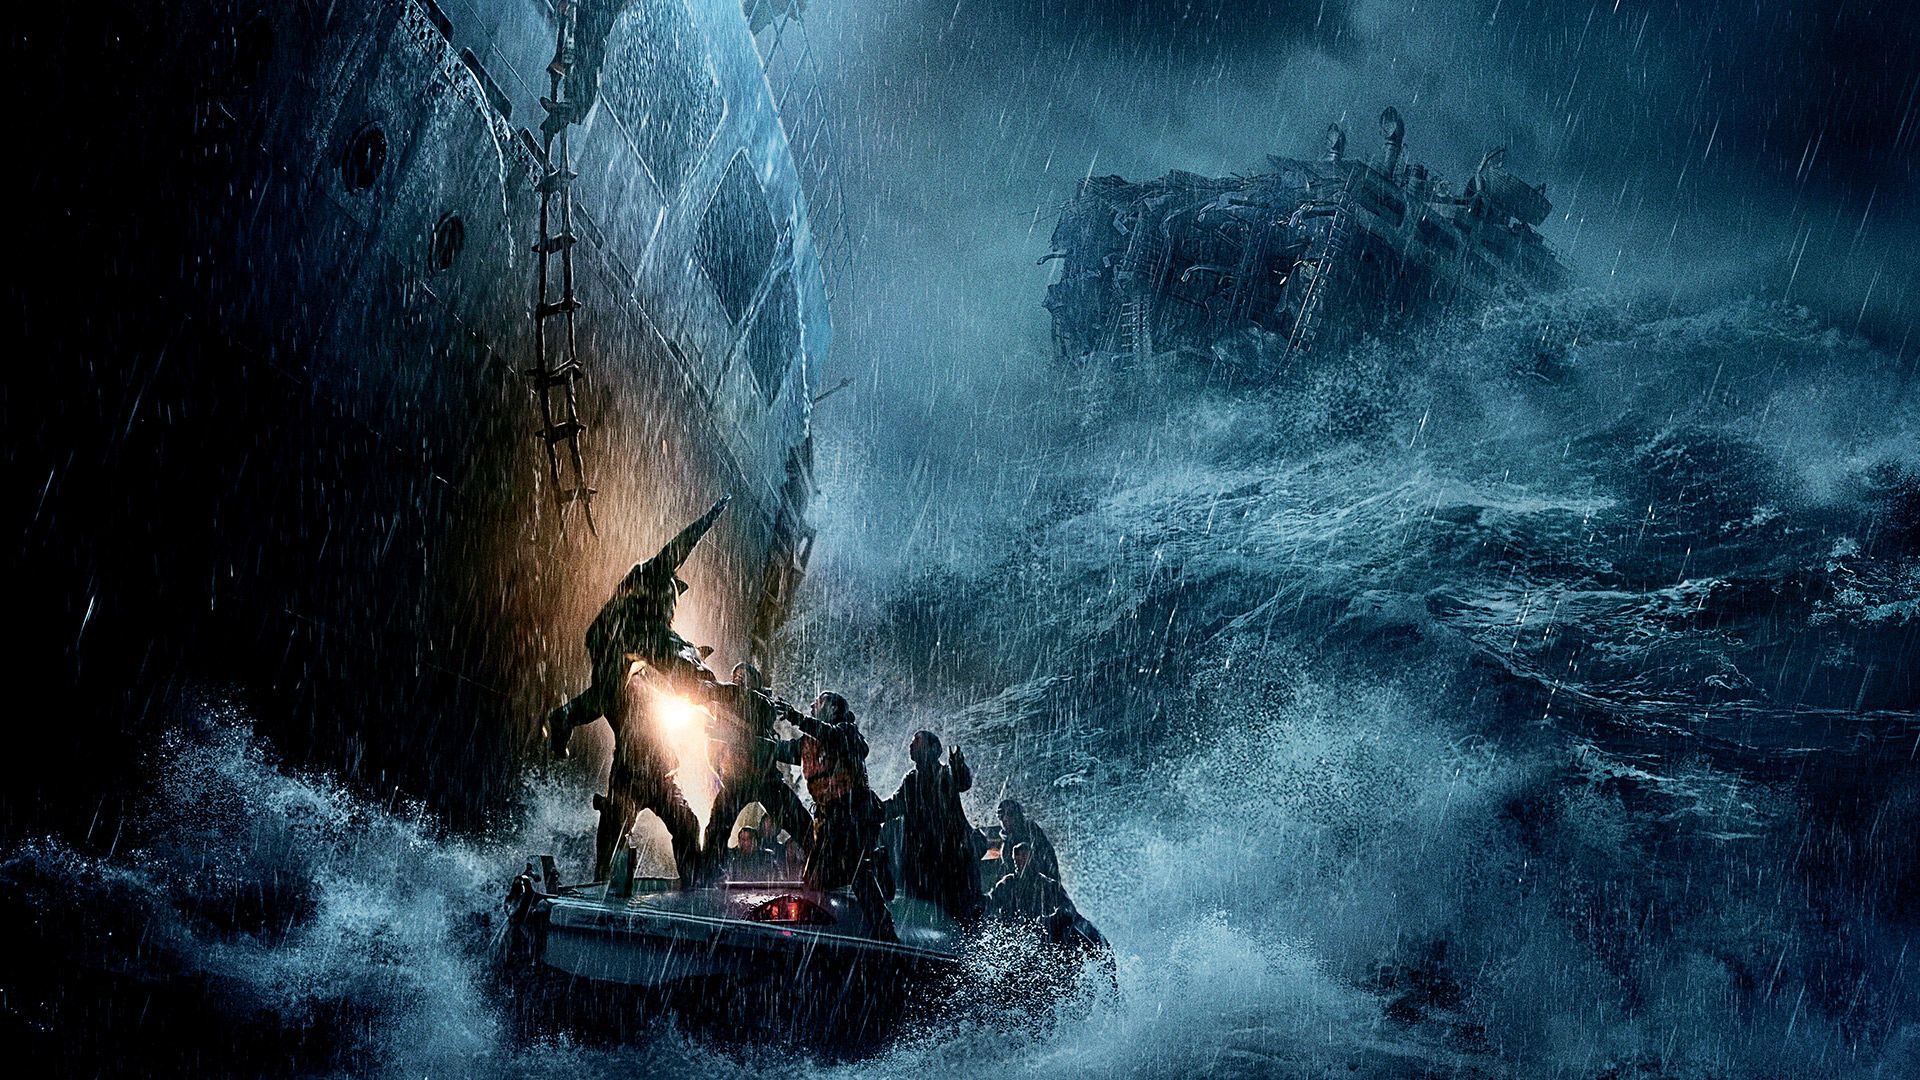 The Finest Hours background